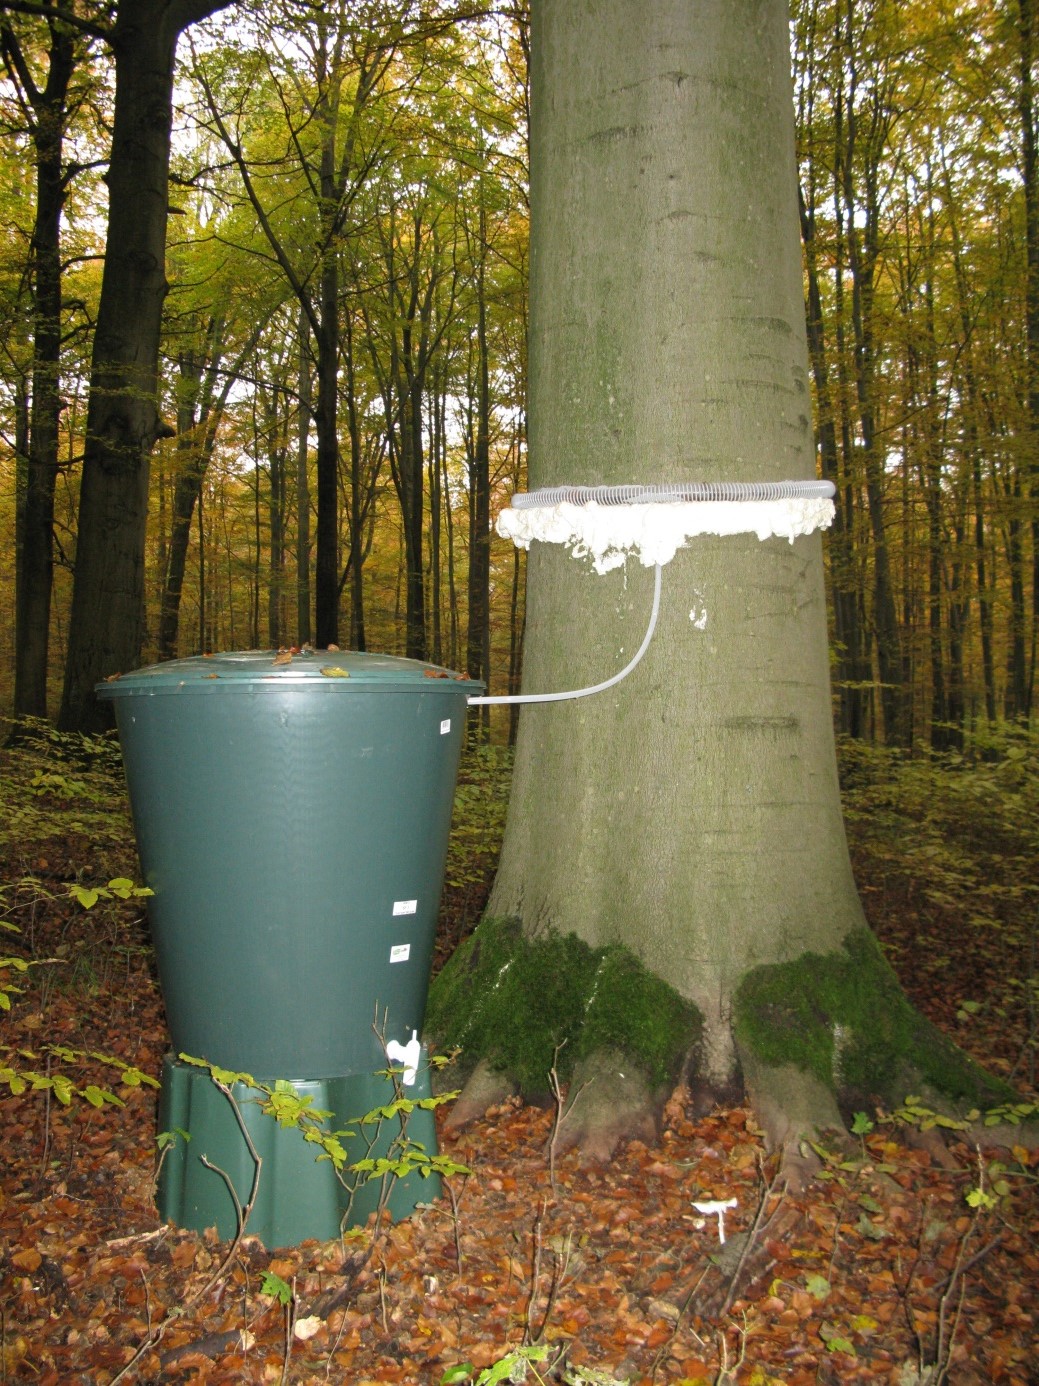 Picture: The photo shows a barrel-shaped collection container for trunk run-off water in an autumnal forest to the left of the trunk of a beech tree. A sleeve has been placed around the trunk with polyurethane foam that looks like whipped cream. The foam cuff fixes a ring-shaped hose made of plastic. From the hose, a second thinner hose leads to the dark green collection barrel, which stands on an equally dark green stool-like pedestal on the leaf-covered forest floor.